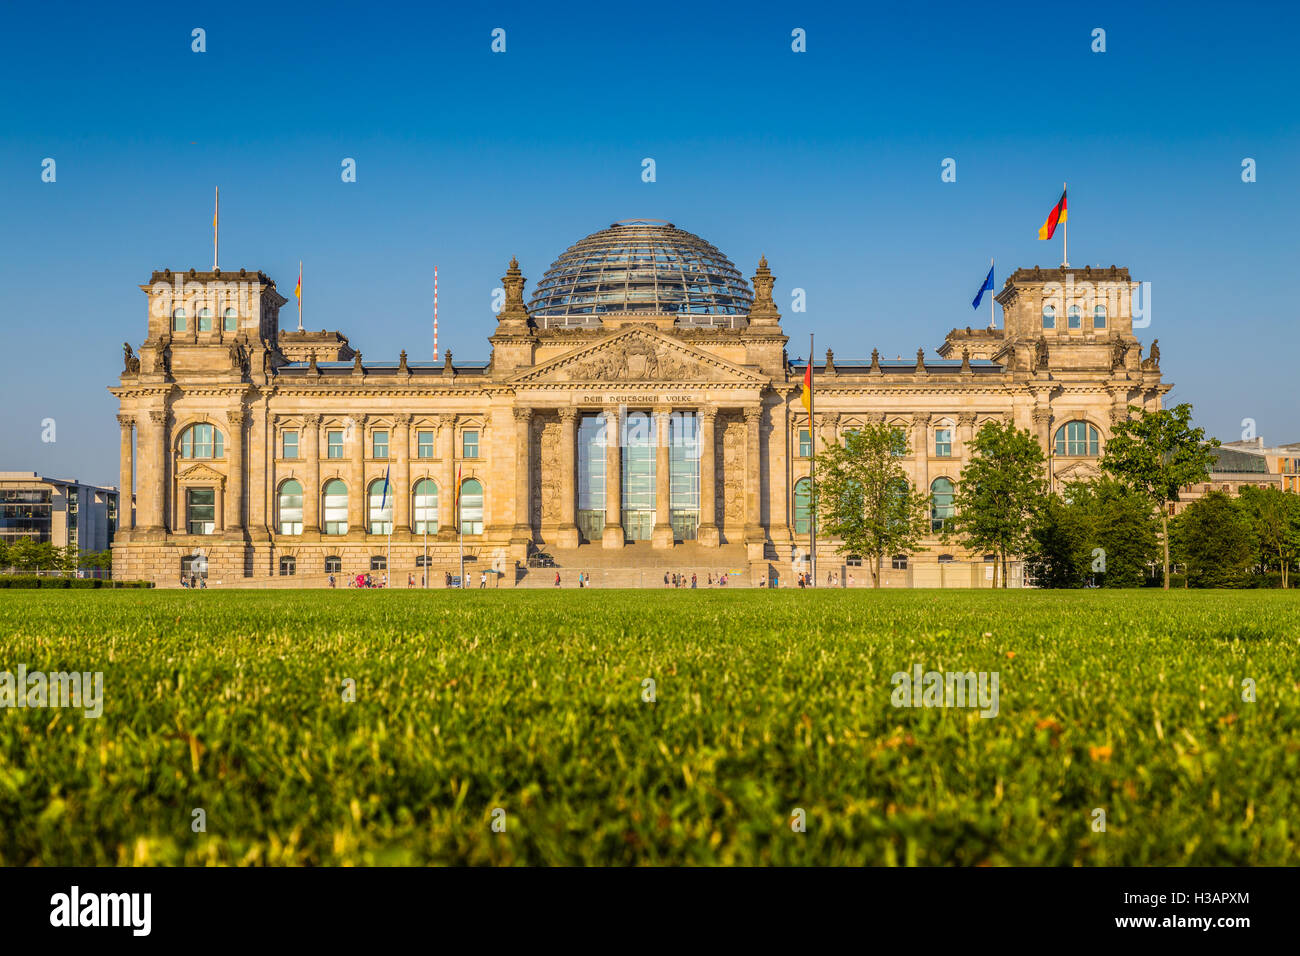 Panoramic view of famous Reichstag building, seat of the German Parliament, in beautiful golden evening light at sunset, Berlin Mitte, Germany Stock Photo